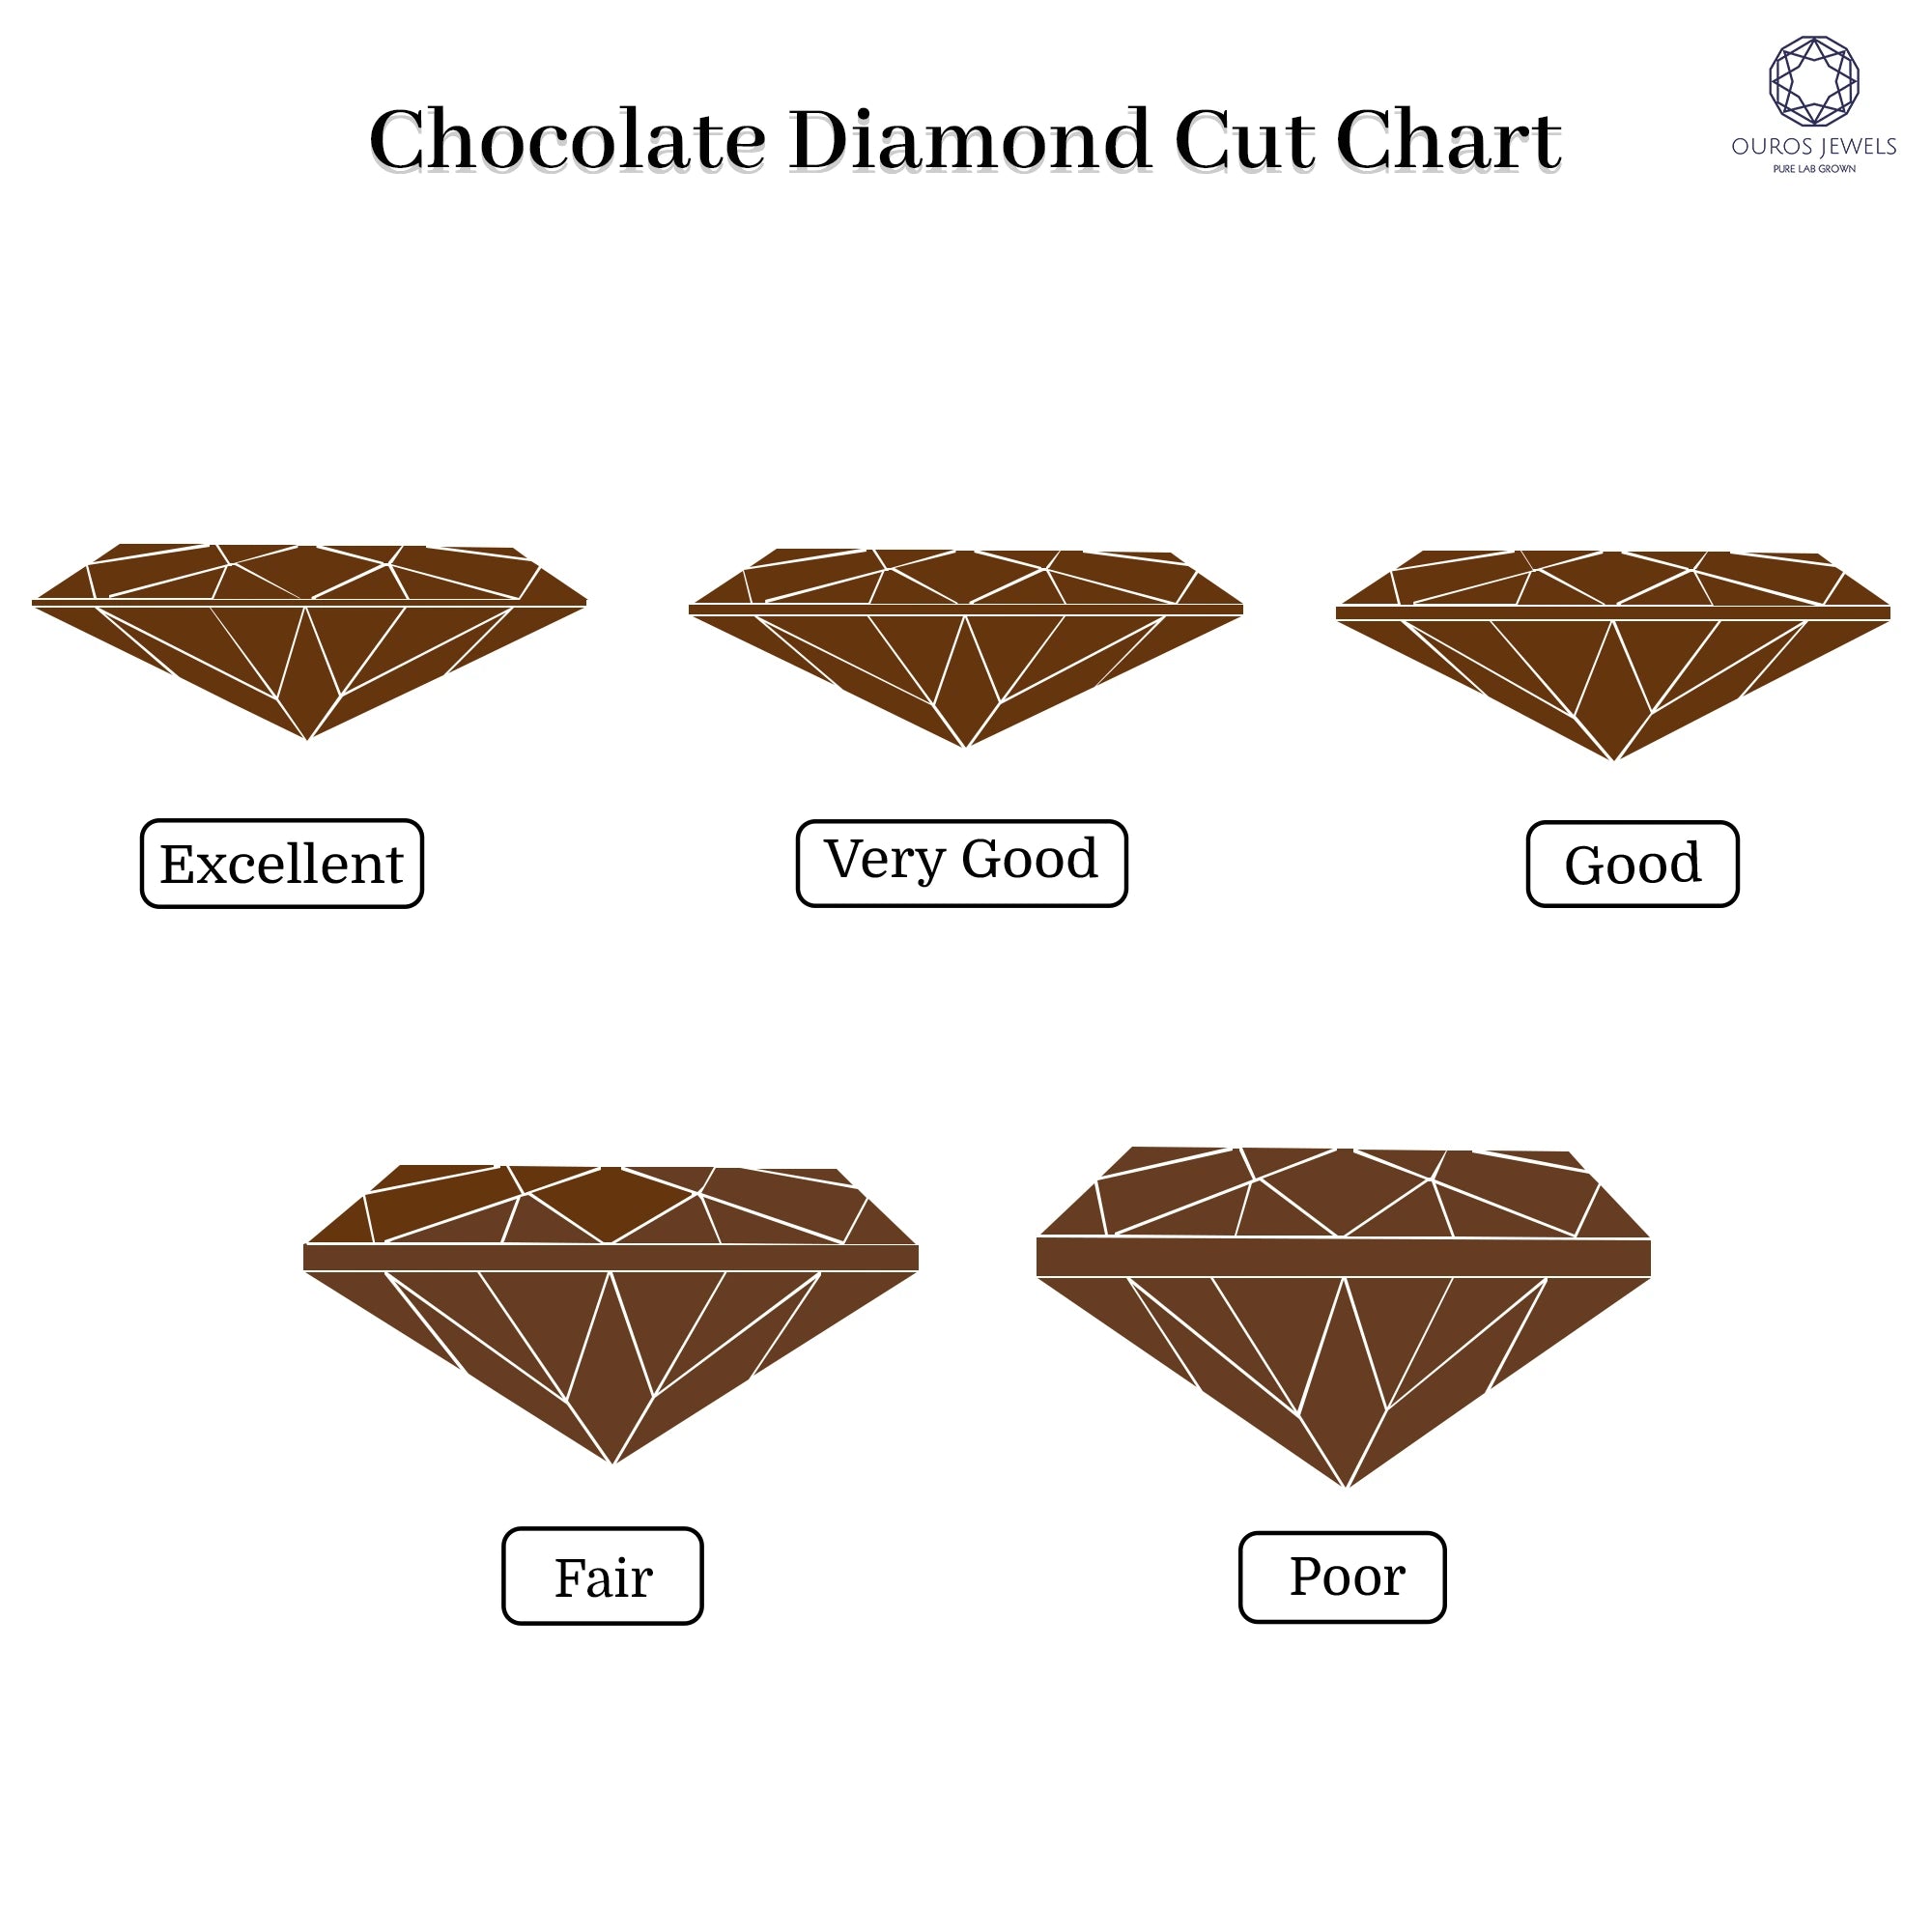 Cut chart for chocolate diamond in Excellent to Poor grades